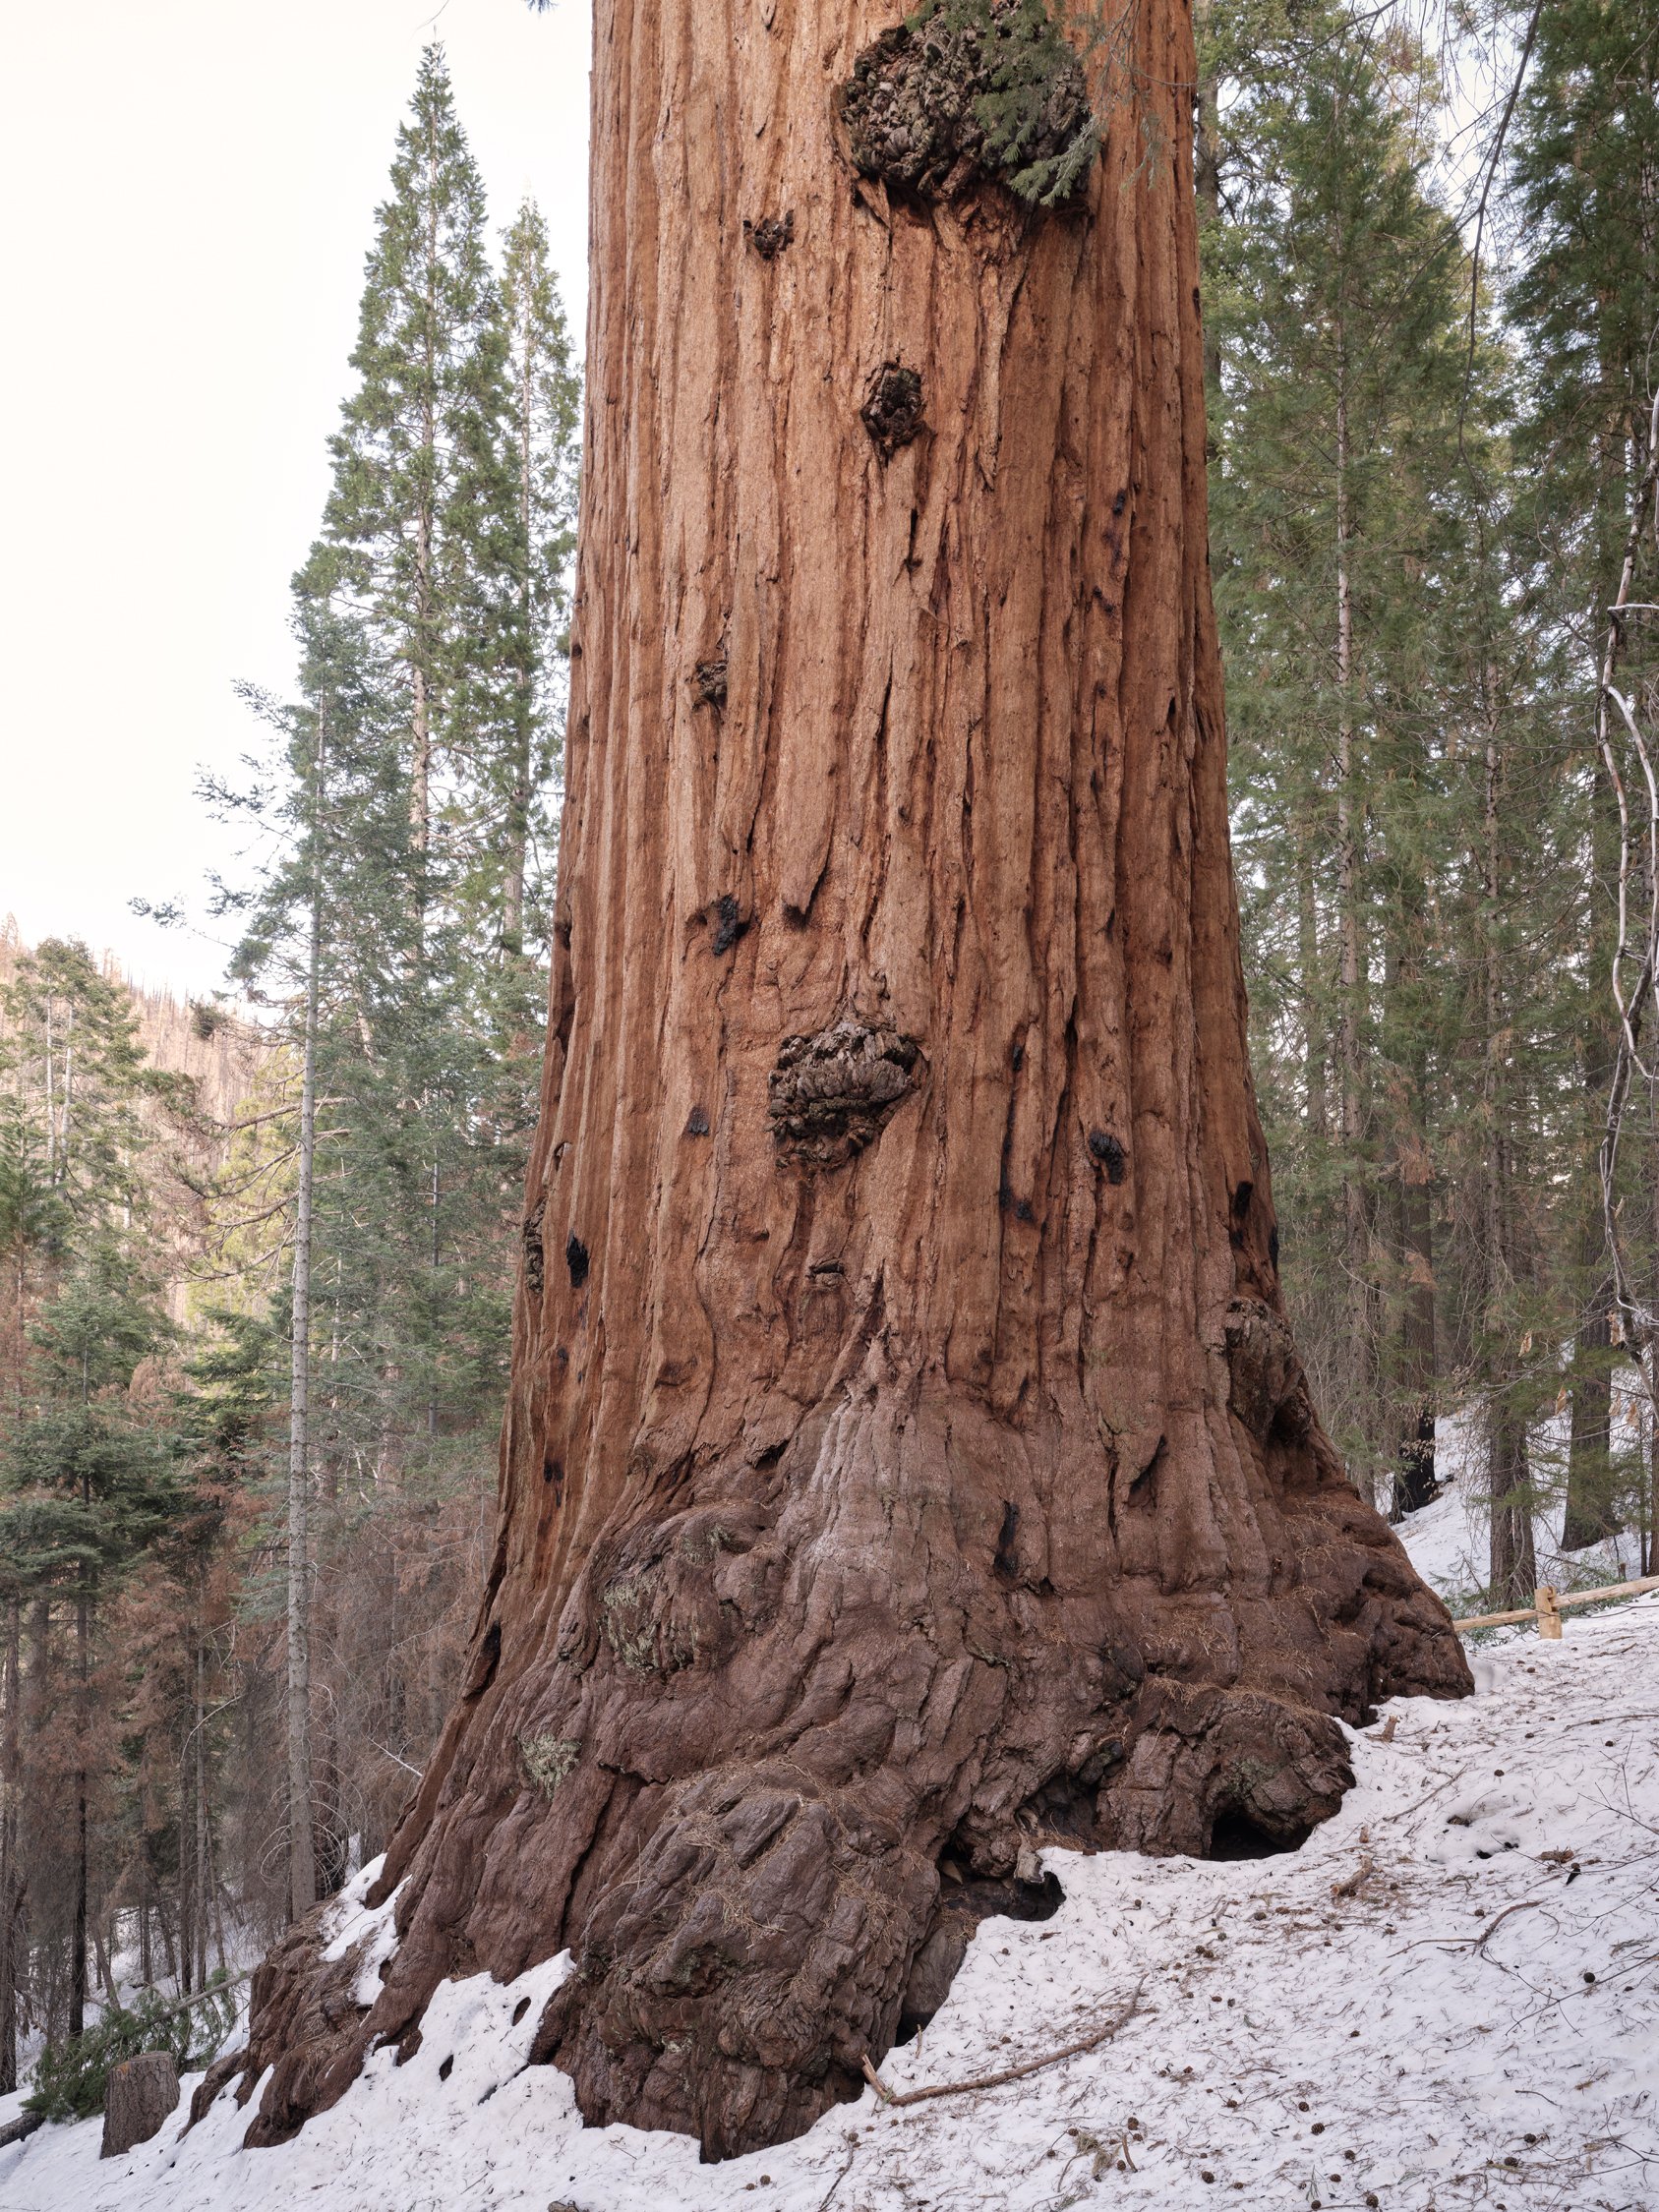 gathering_growth_foundation_stagg_tree_giant_sequoia_brian_kelley_02-2022_05.jpg